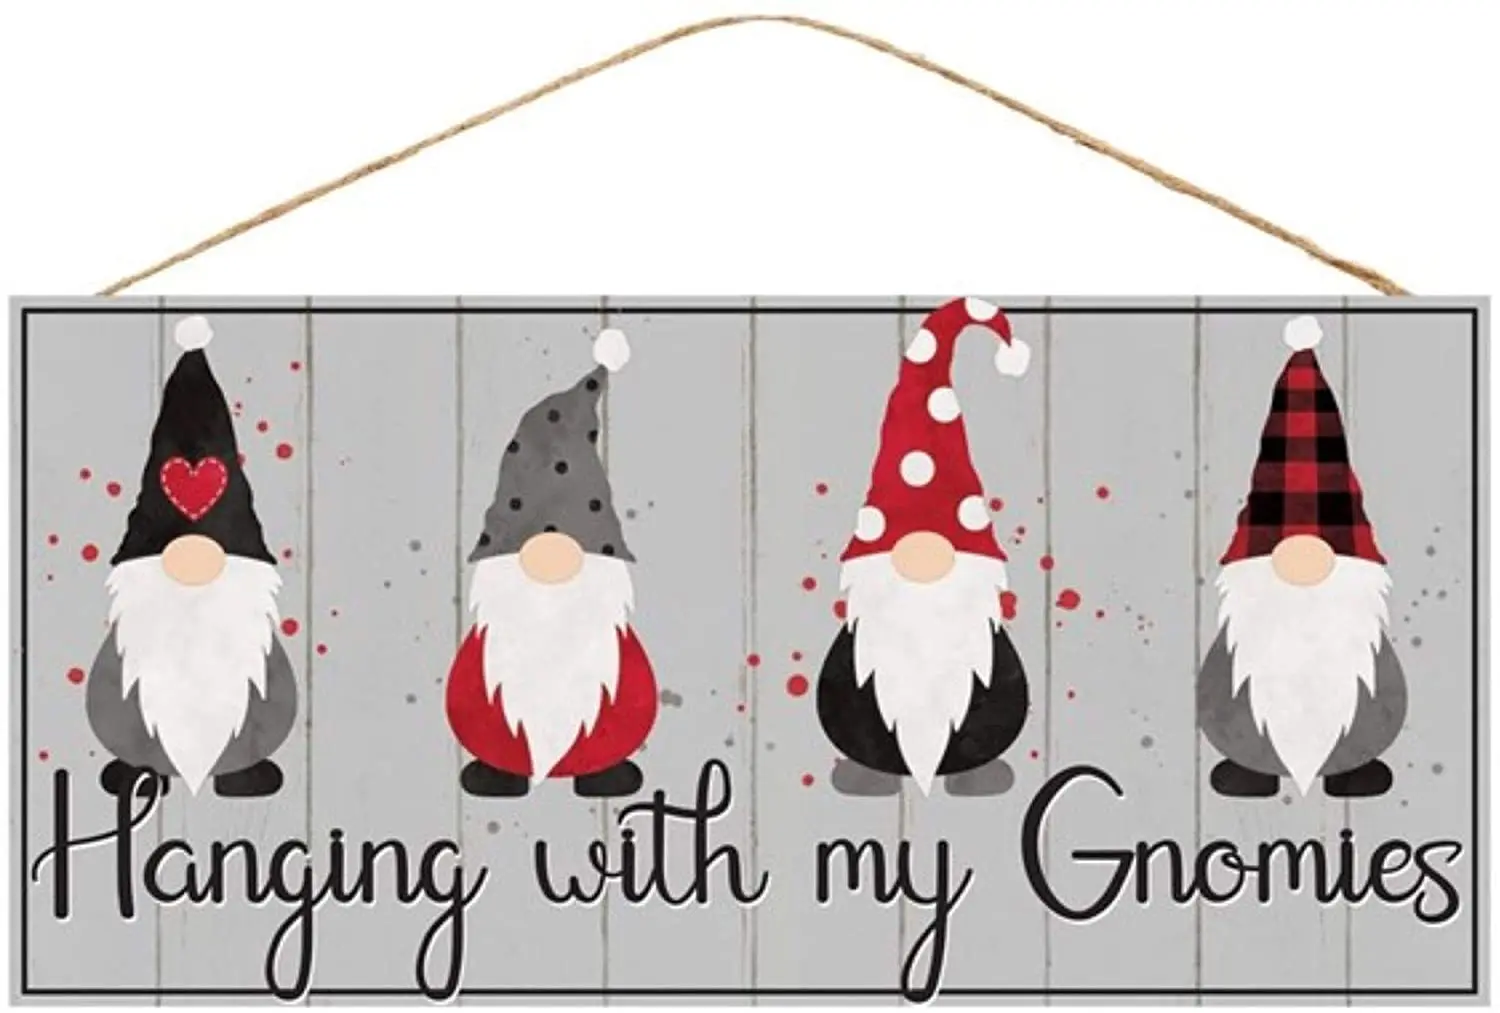 

Craig Bachman, 12" Wooden Sign: Hanging with My Gnomies - Christmas Gnomes Wood Wall Door Hanger Sign